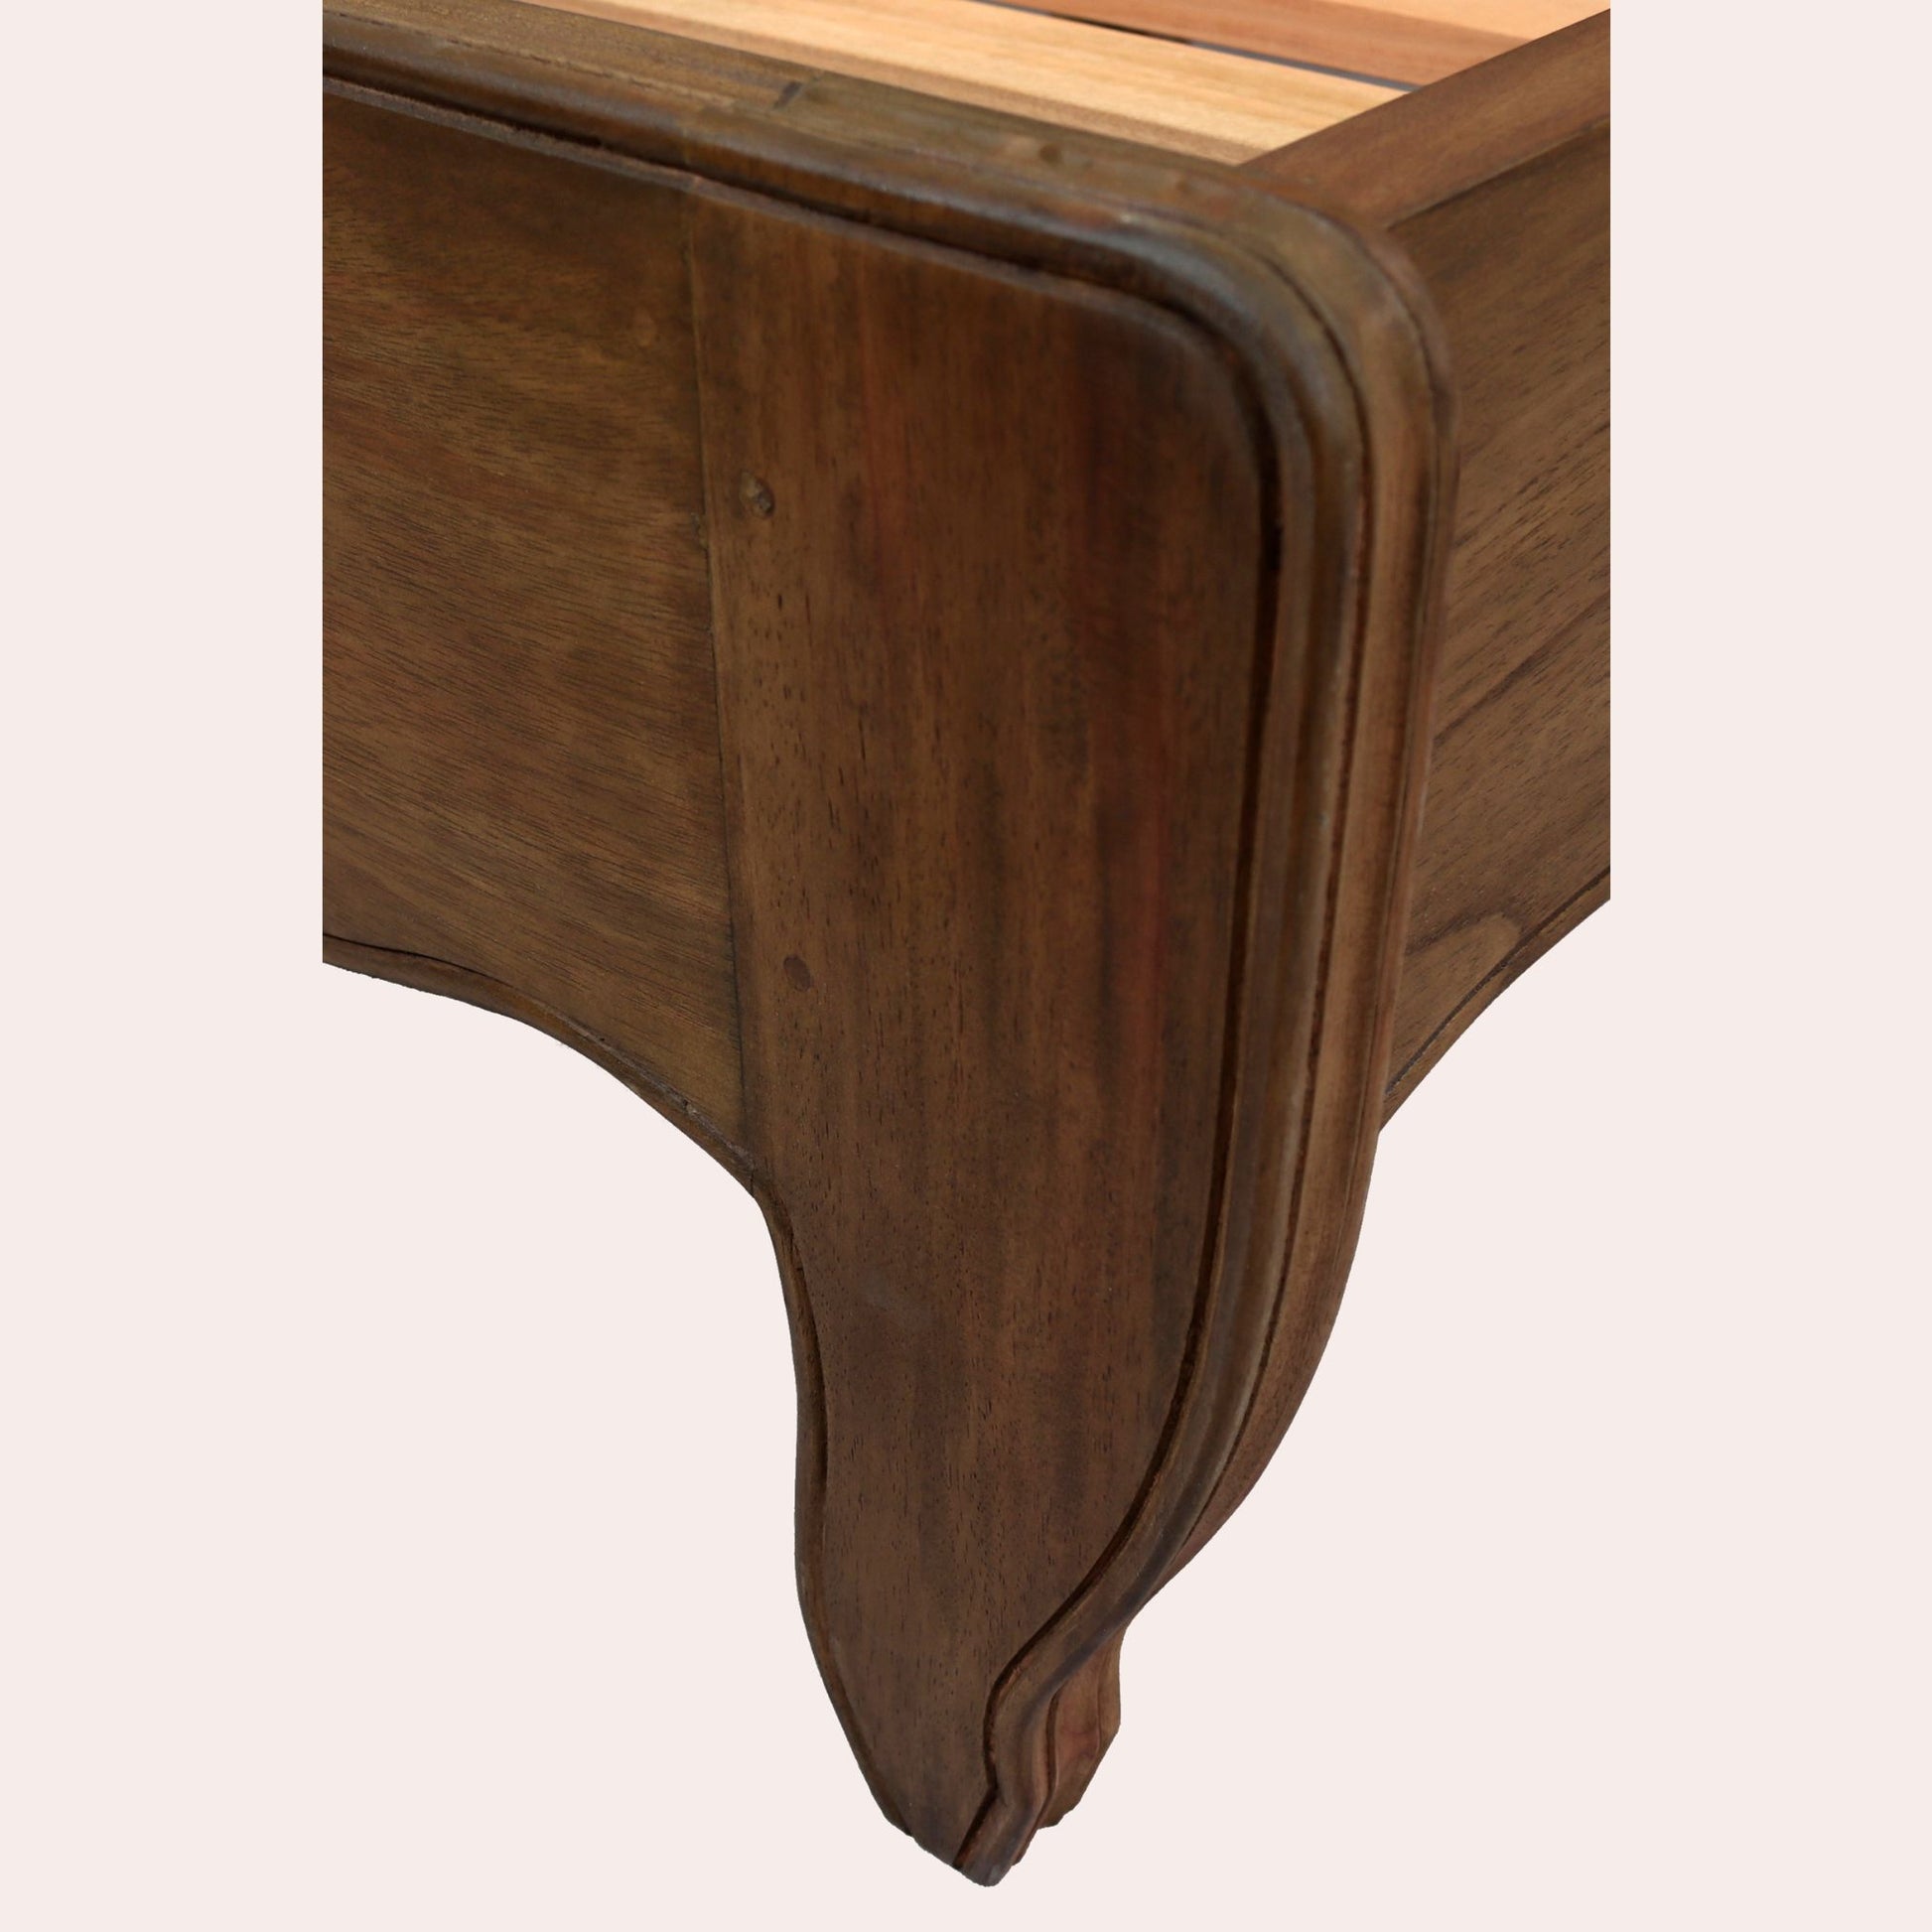 Walnut cabriole style curved bed leg detail